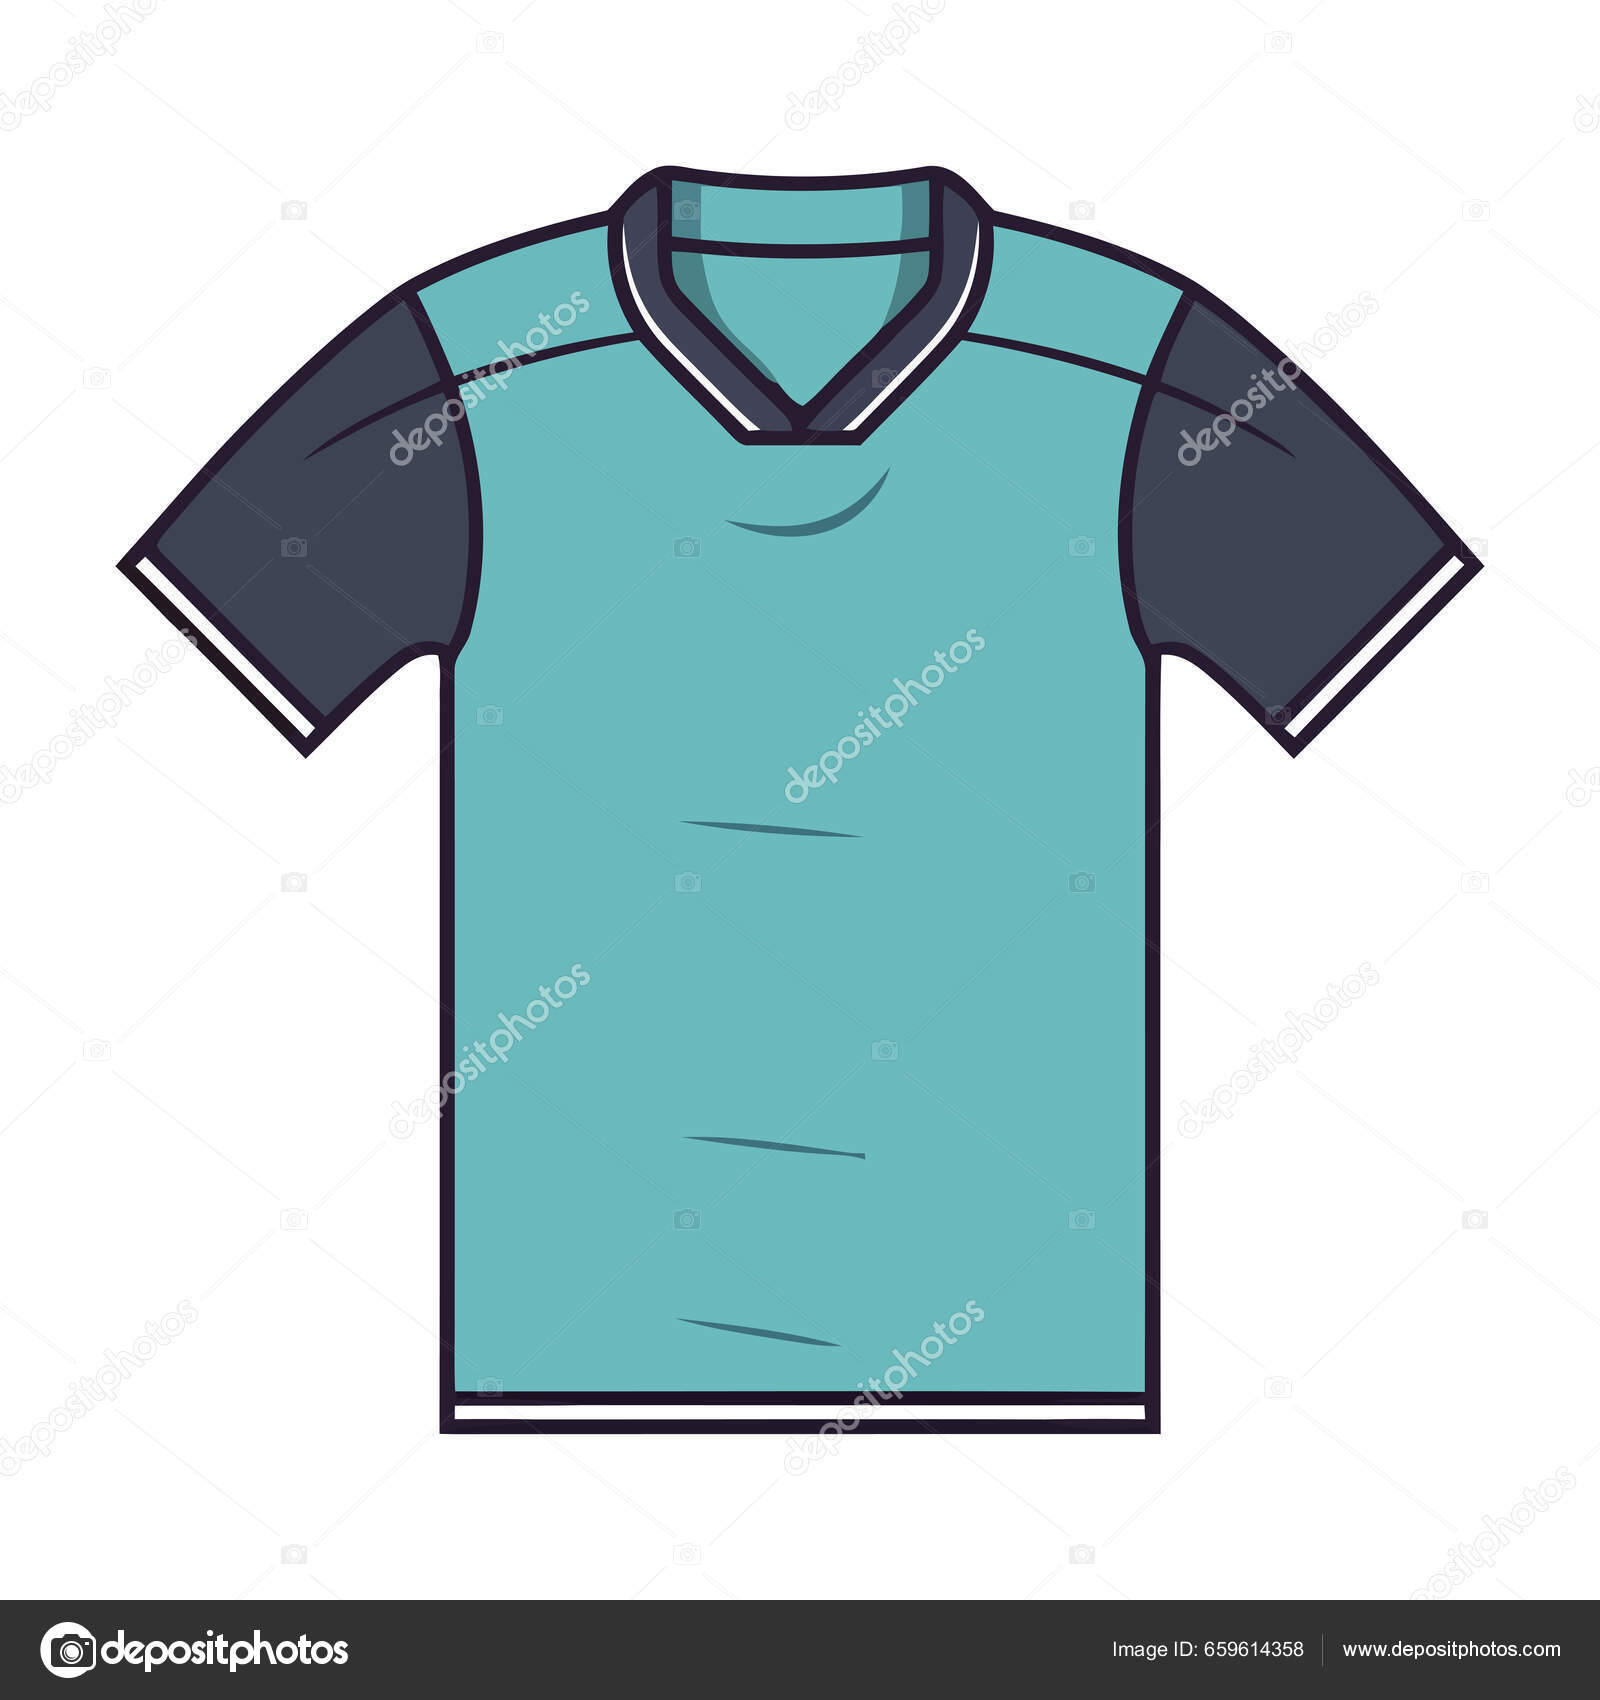 100,000 Blank jersey Vector Images